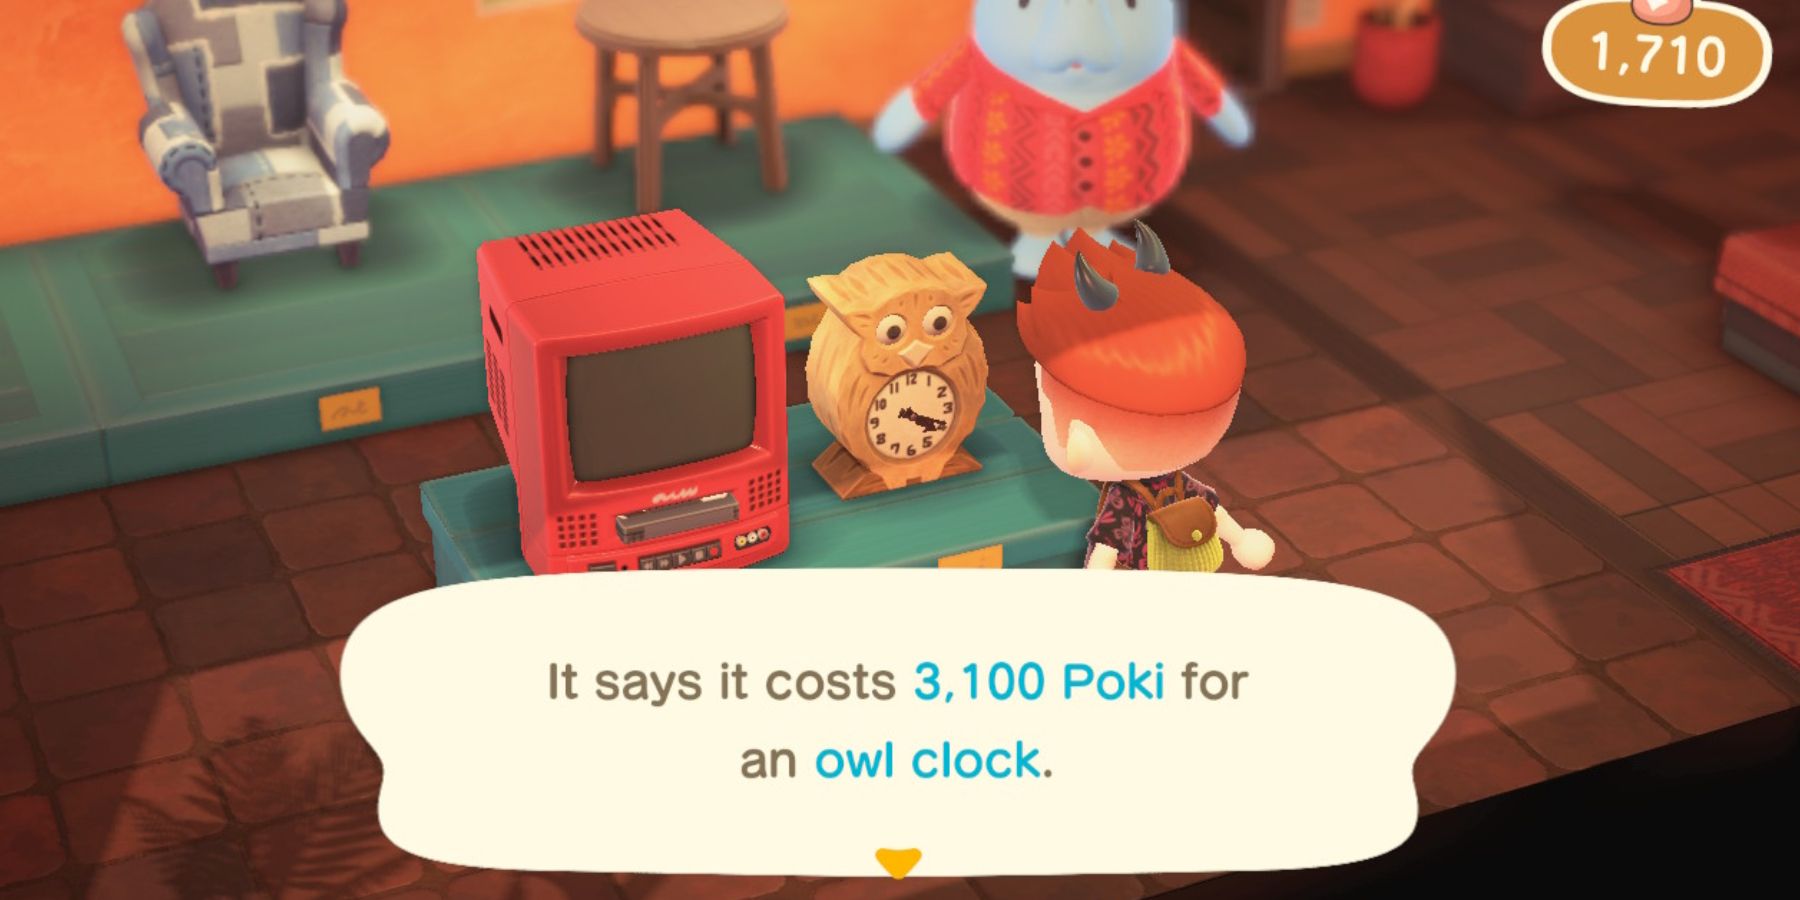 A player examines an owl clock on sale for Poki at the Happy Home Paradise DLC Office Shop in Animal Crossing: New Horizons